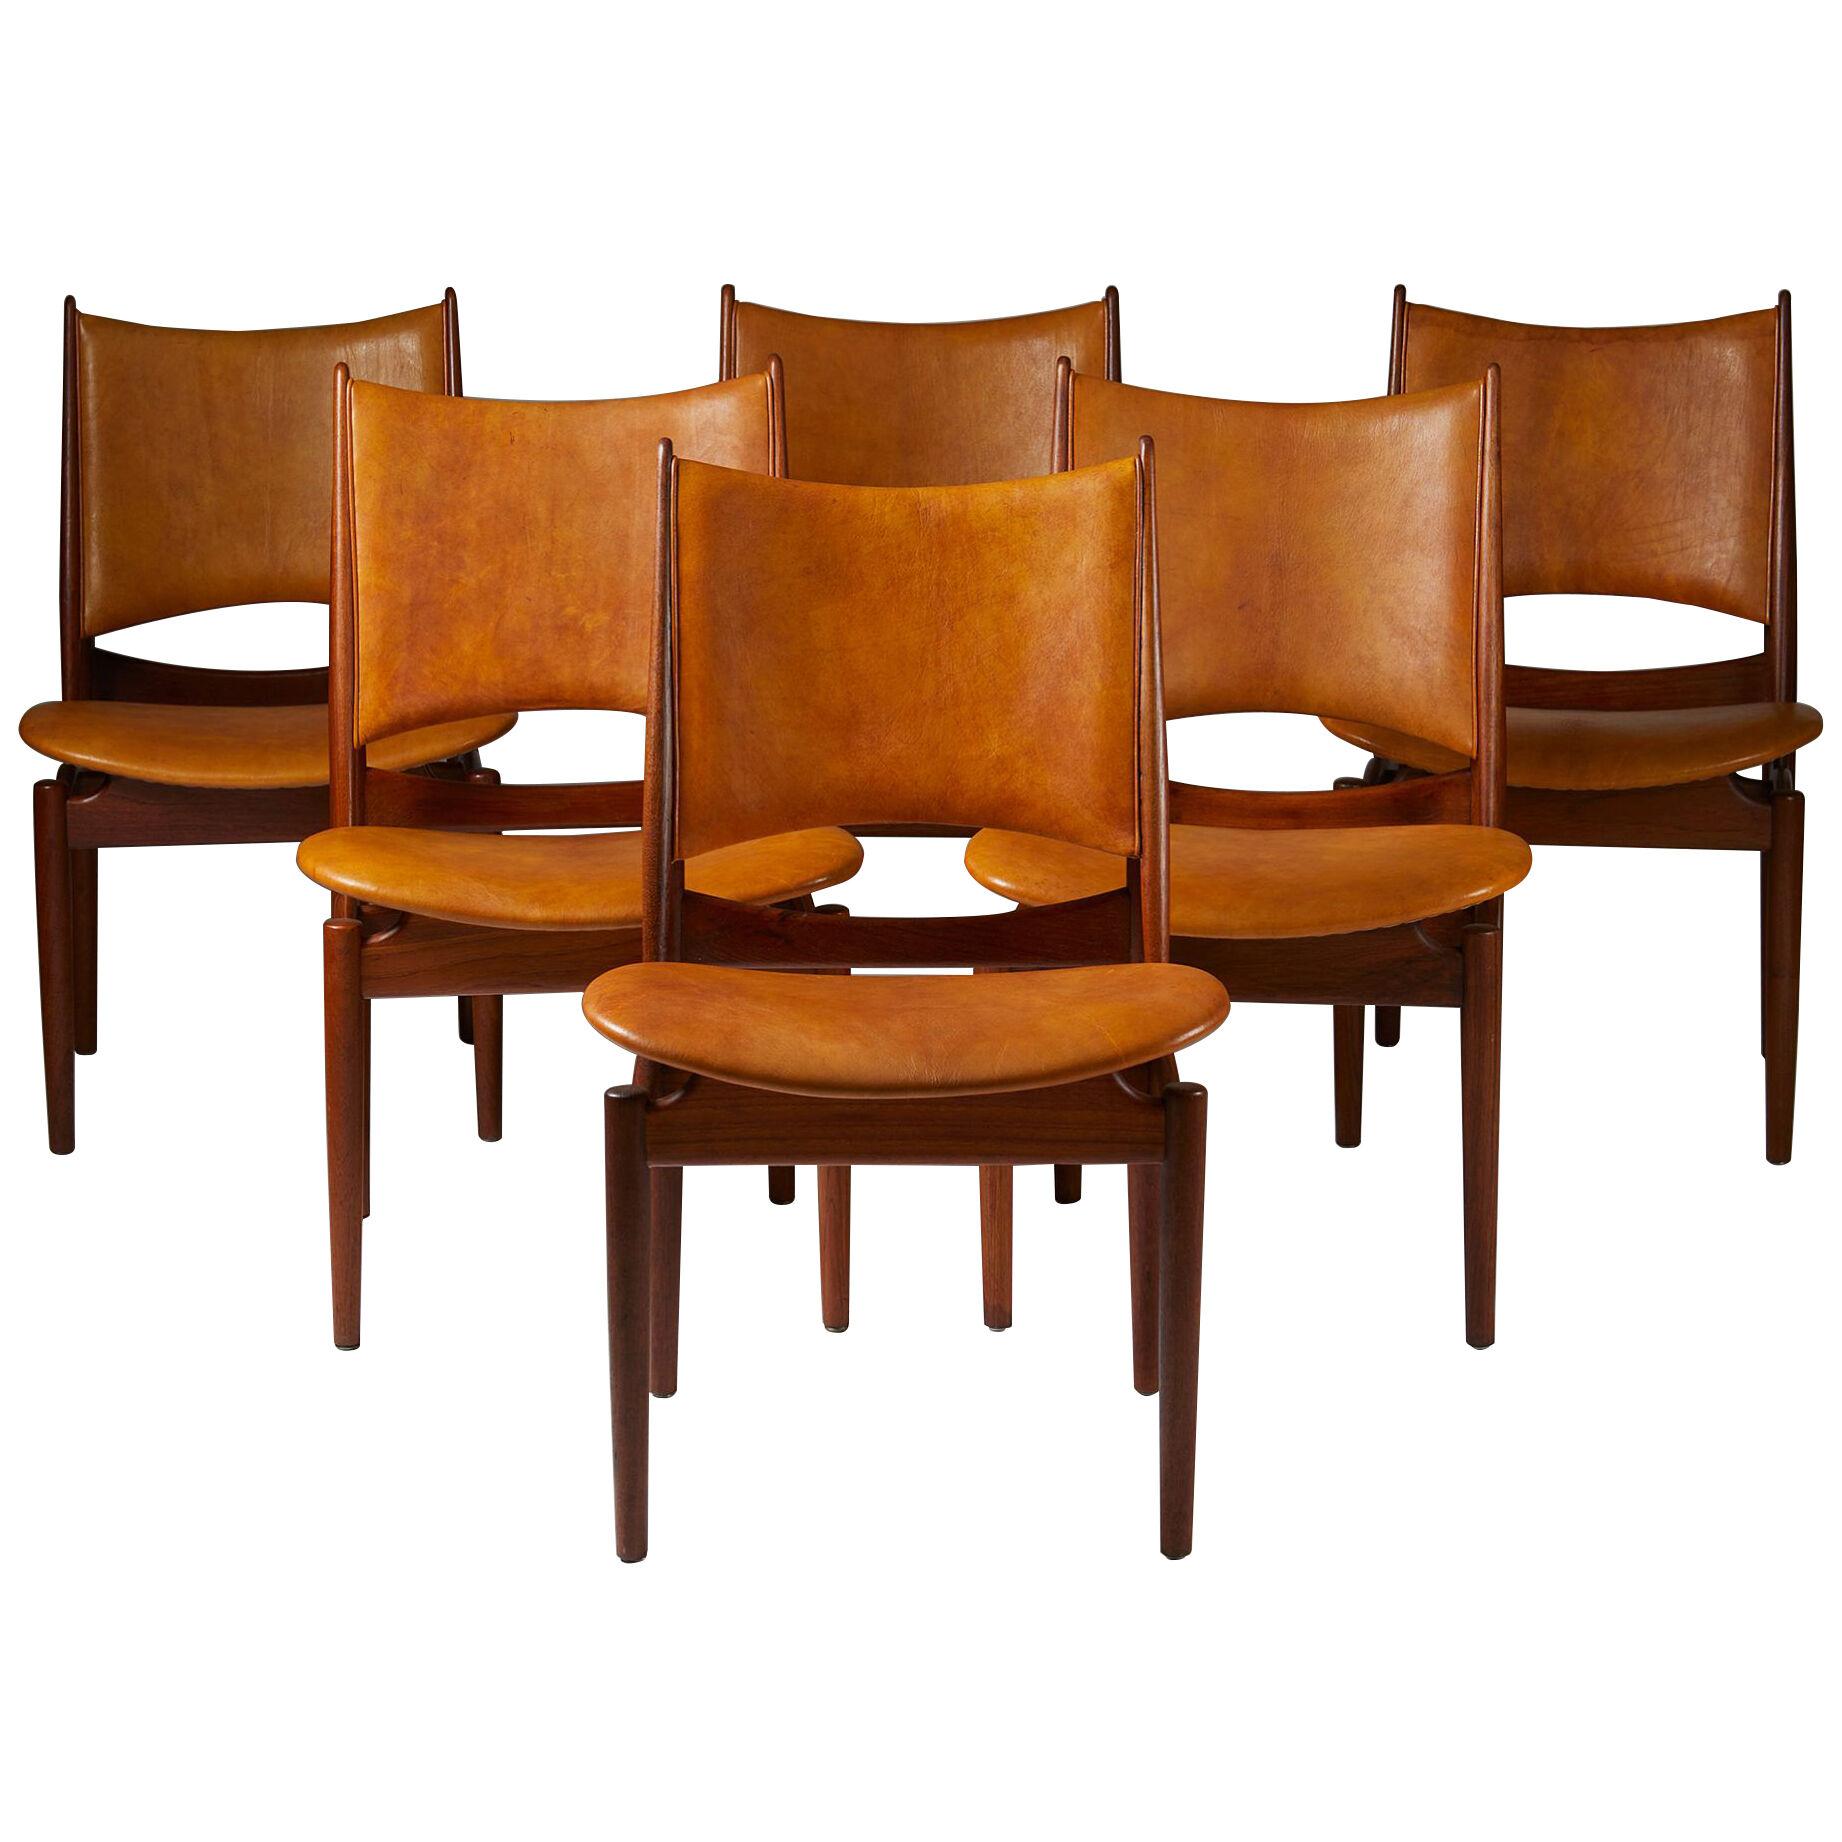 A set of six dining chairs, “Egyptian chairs” designed by Finn Juhl